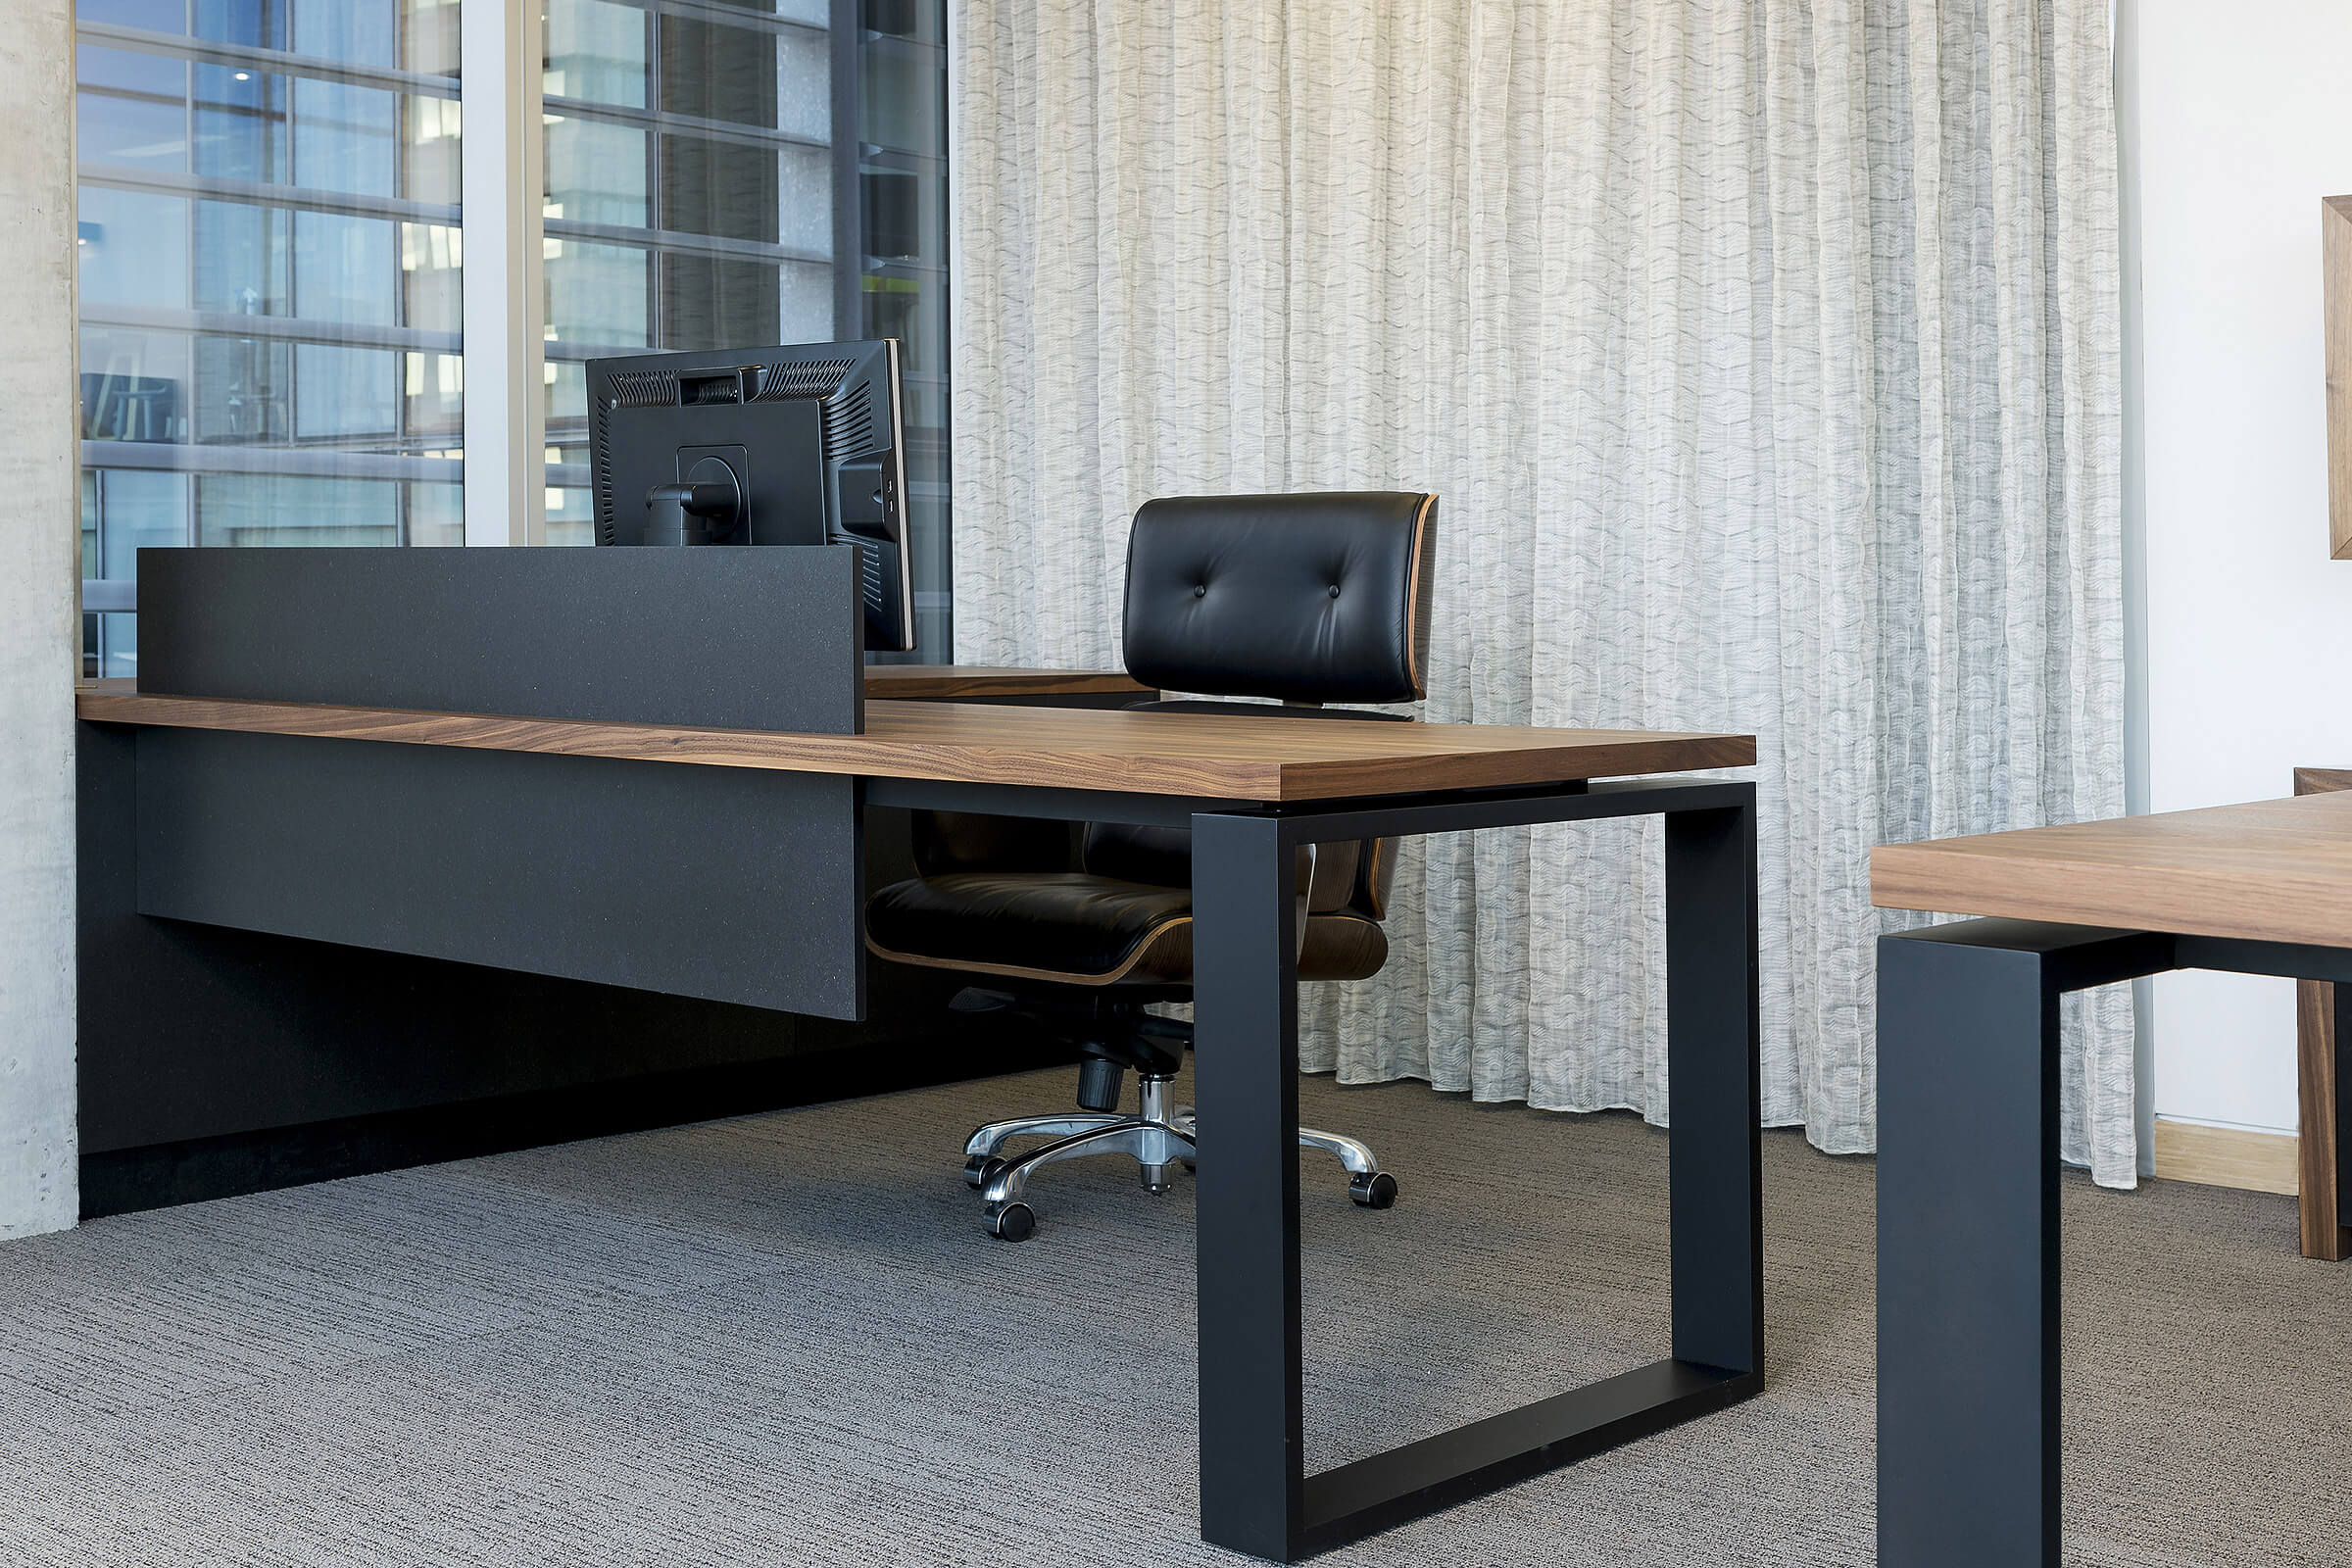 As you walk into this Adelaide city office the bespoke desk by Australian designer FrancoCrea stands out impressively in the space ready for business